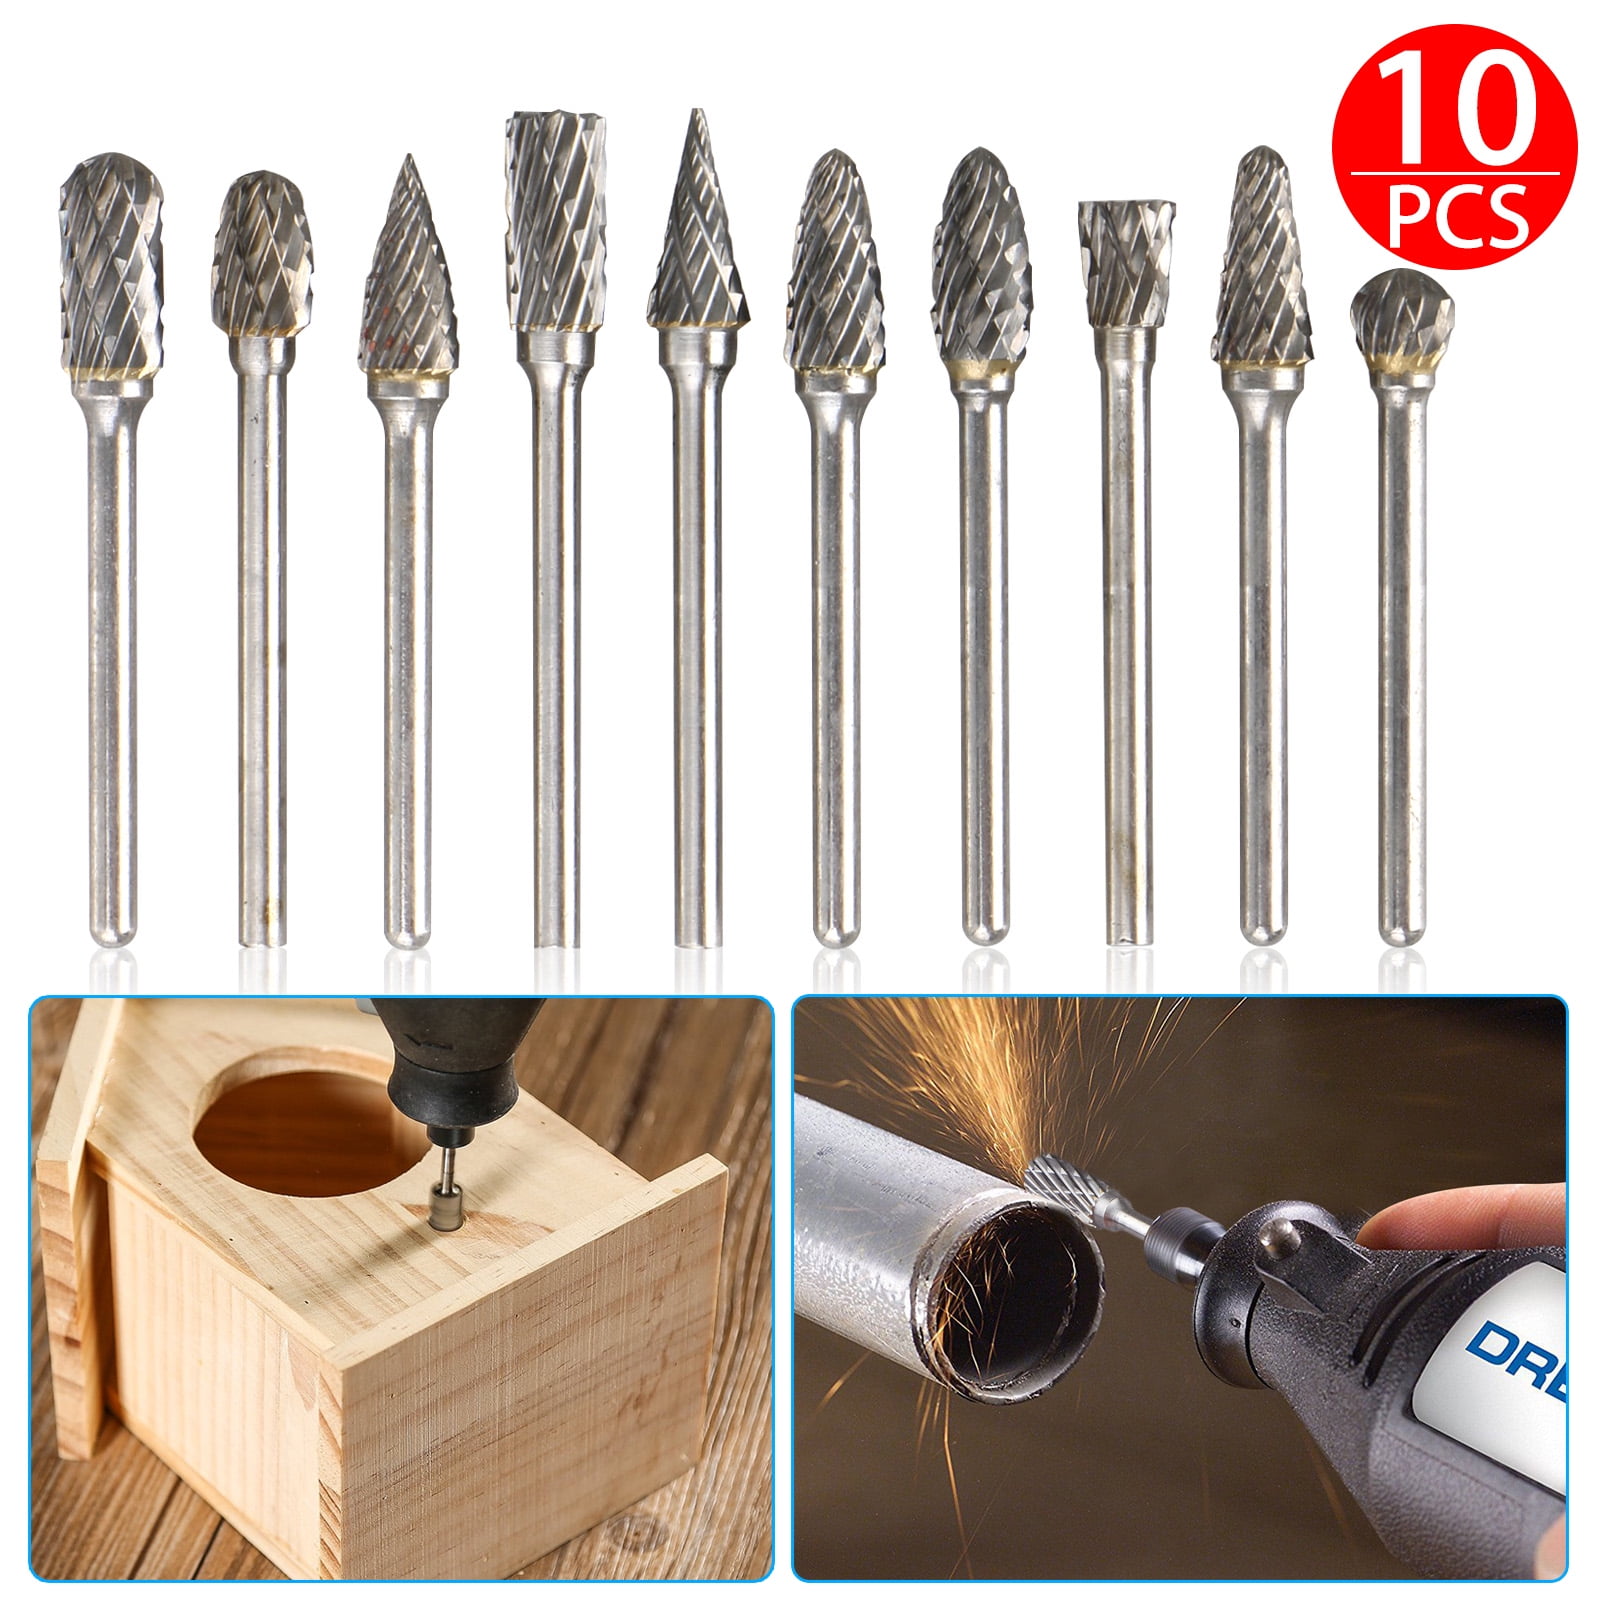 5pc Drill Burr Set Wood Carving Cutter 1/4" Rotary 12mm Tungsten Carbide Head 